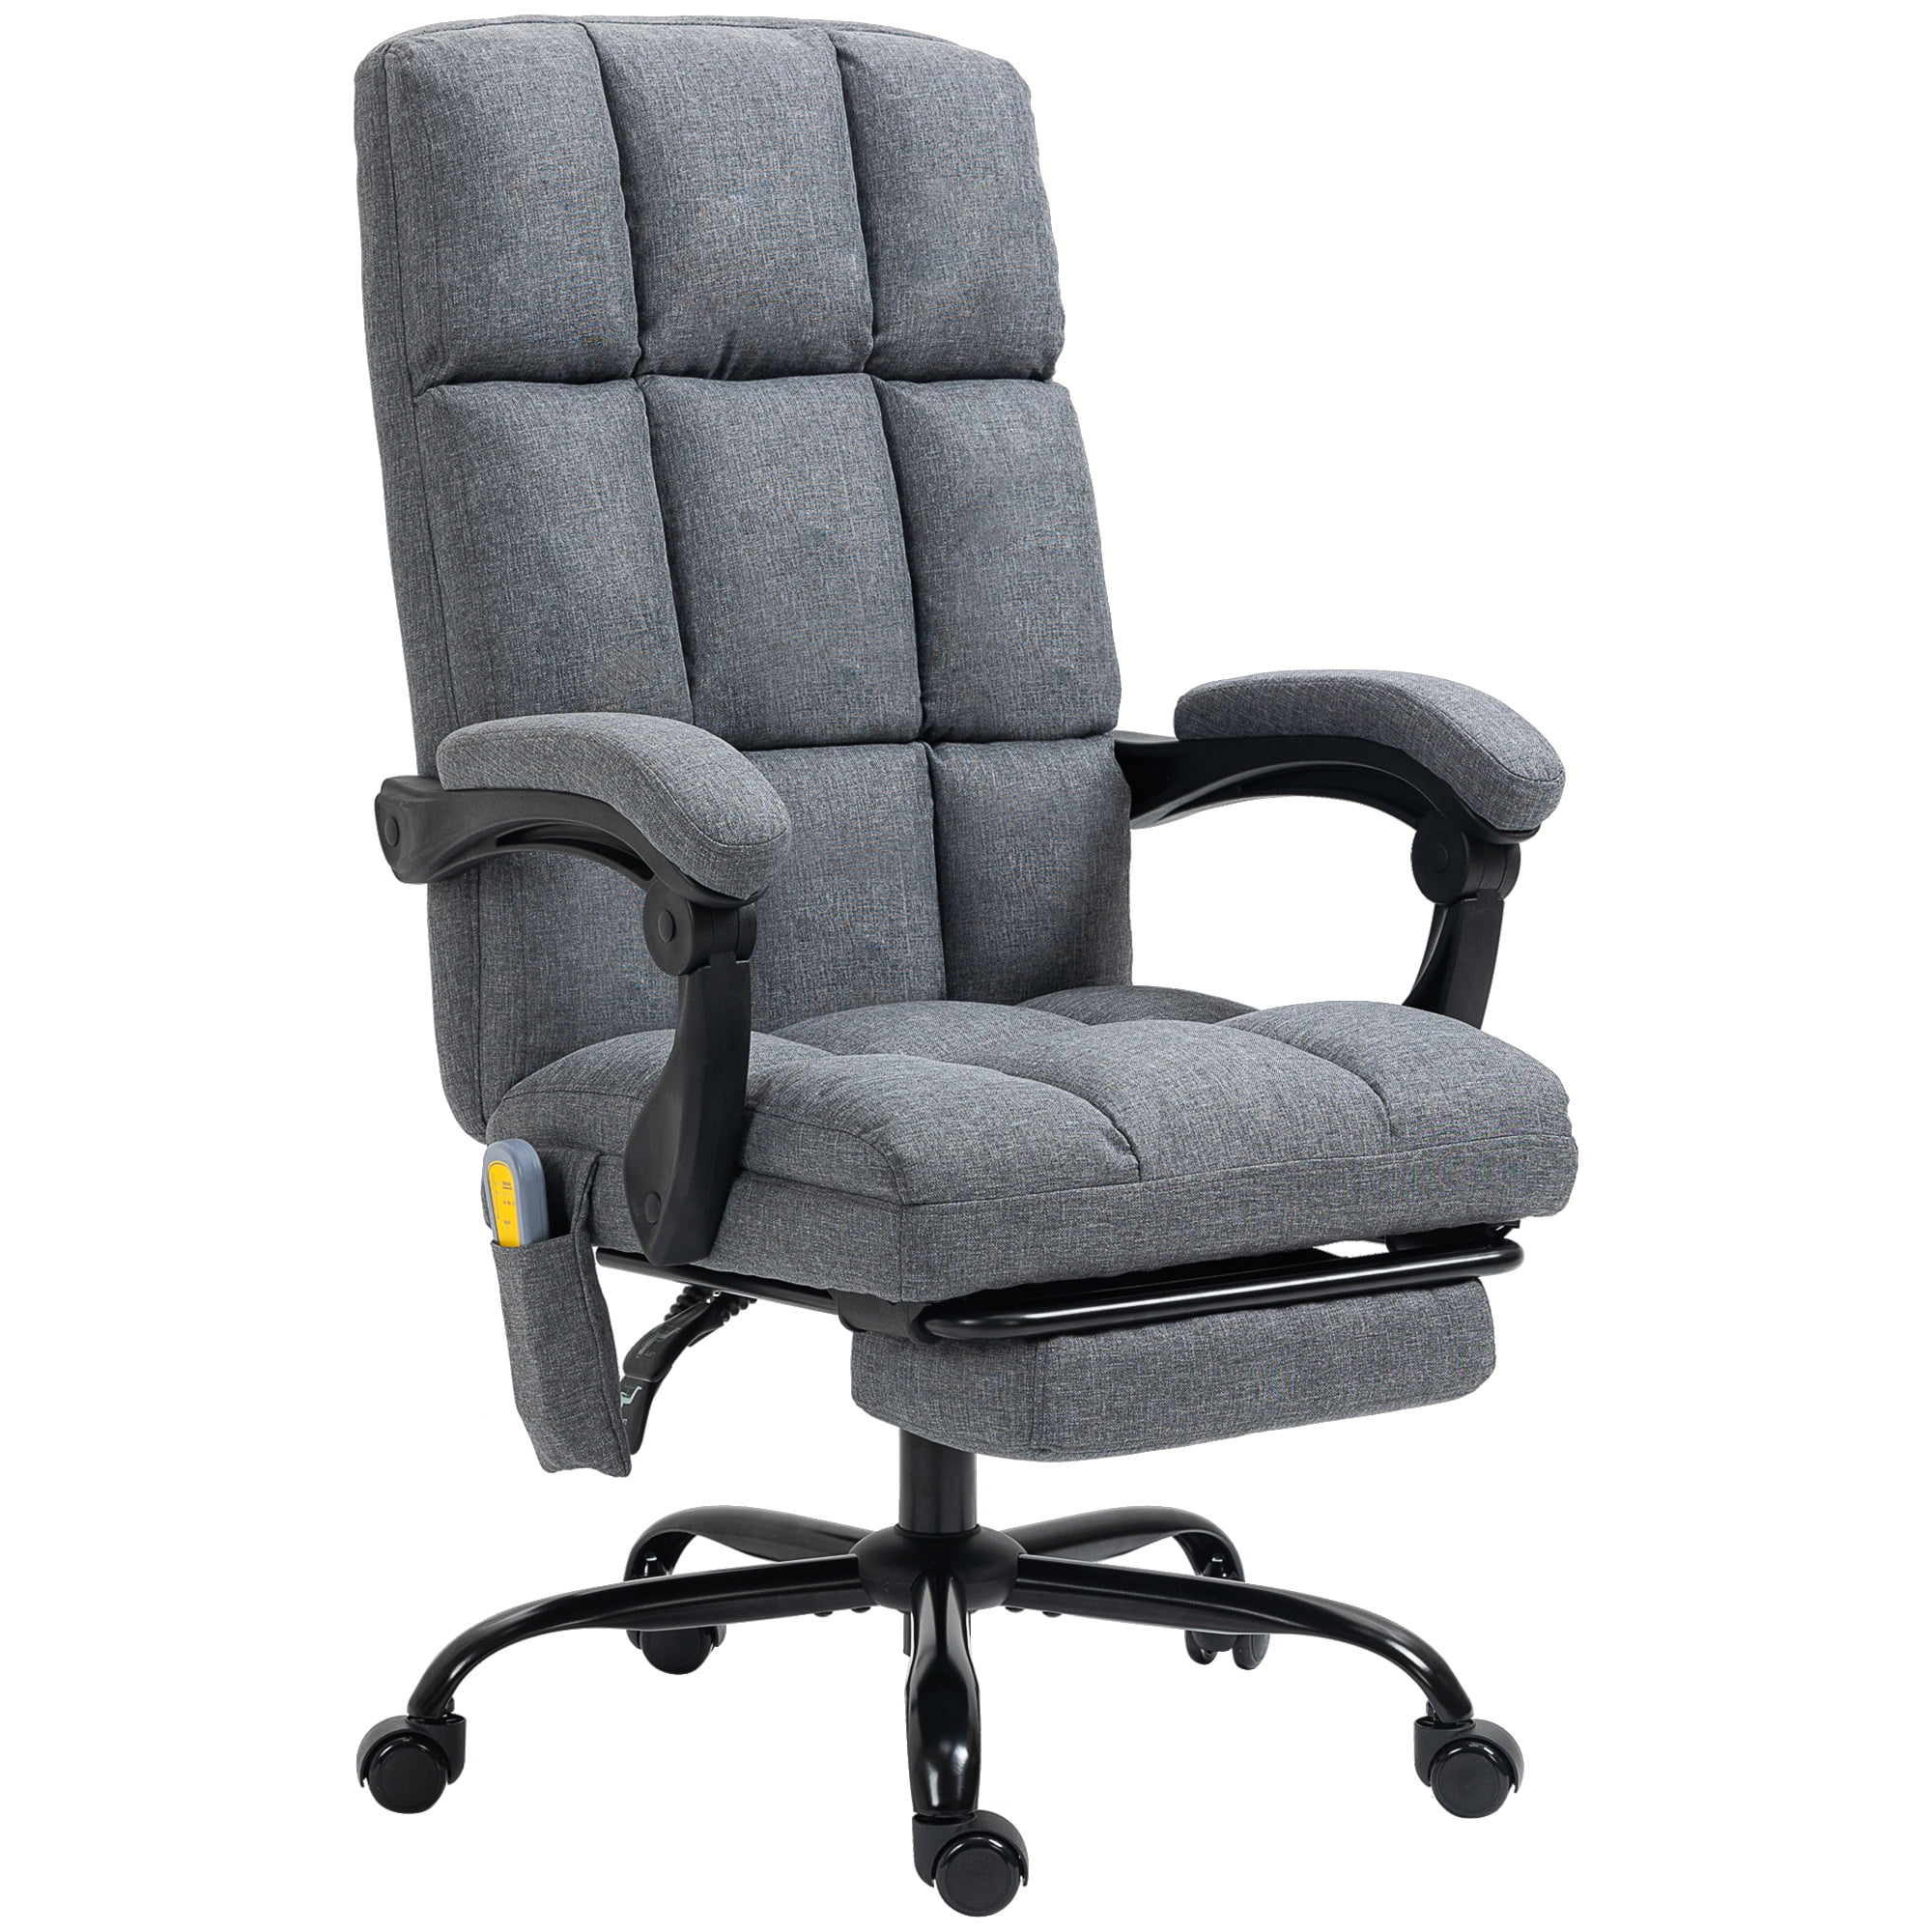 Vinsetto Microfibre Executive Massage Office Chair, Swivel Computer Desk  Chair, Heated Reclining Computer Chair with Lumbar Support Pillow, Cream